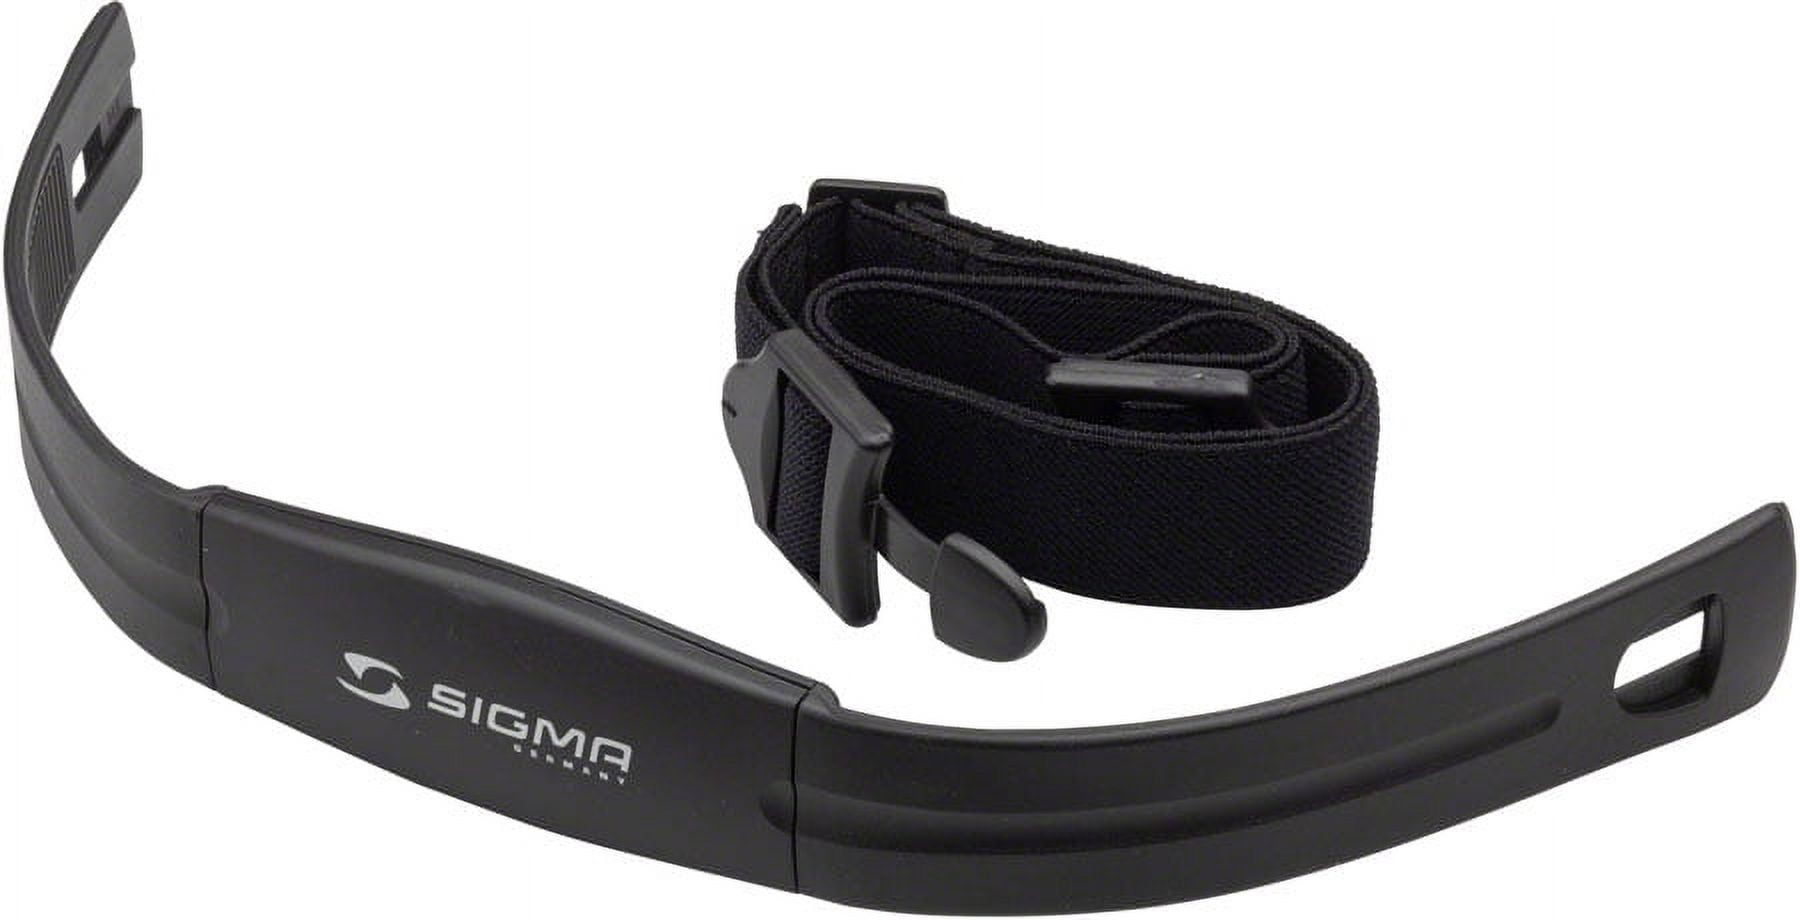 NEW Sigma Heart Rate Chest Strap/Transmitter for Non Coded Sigma